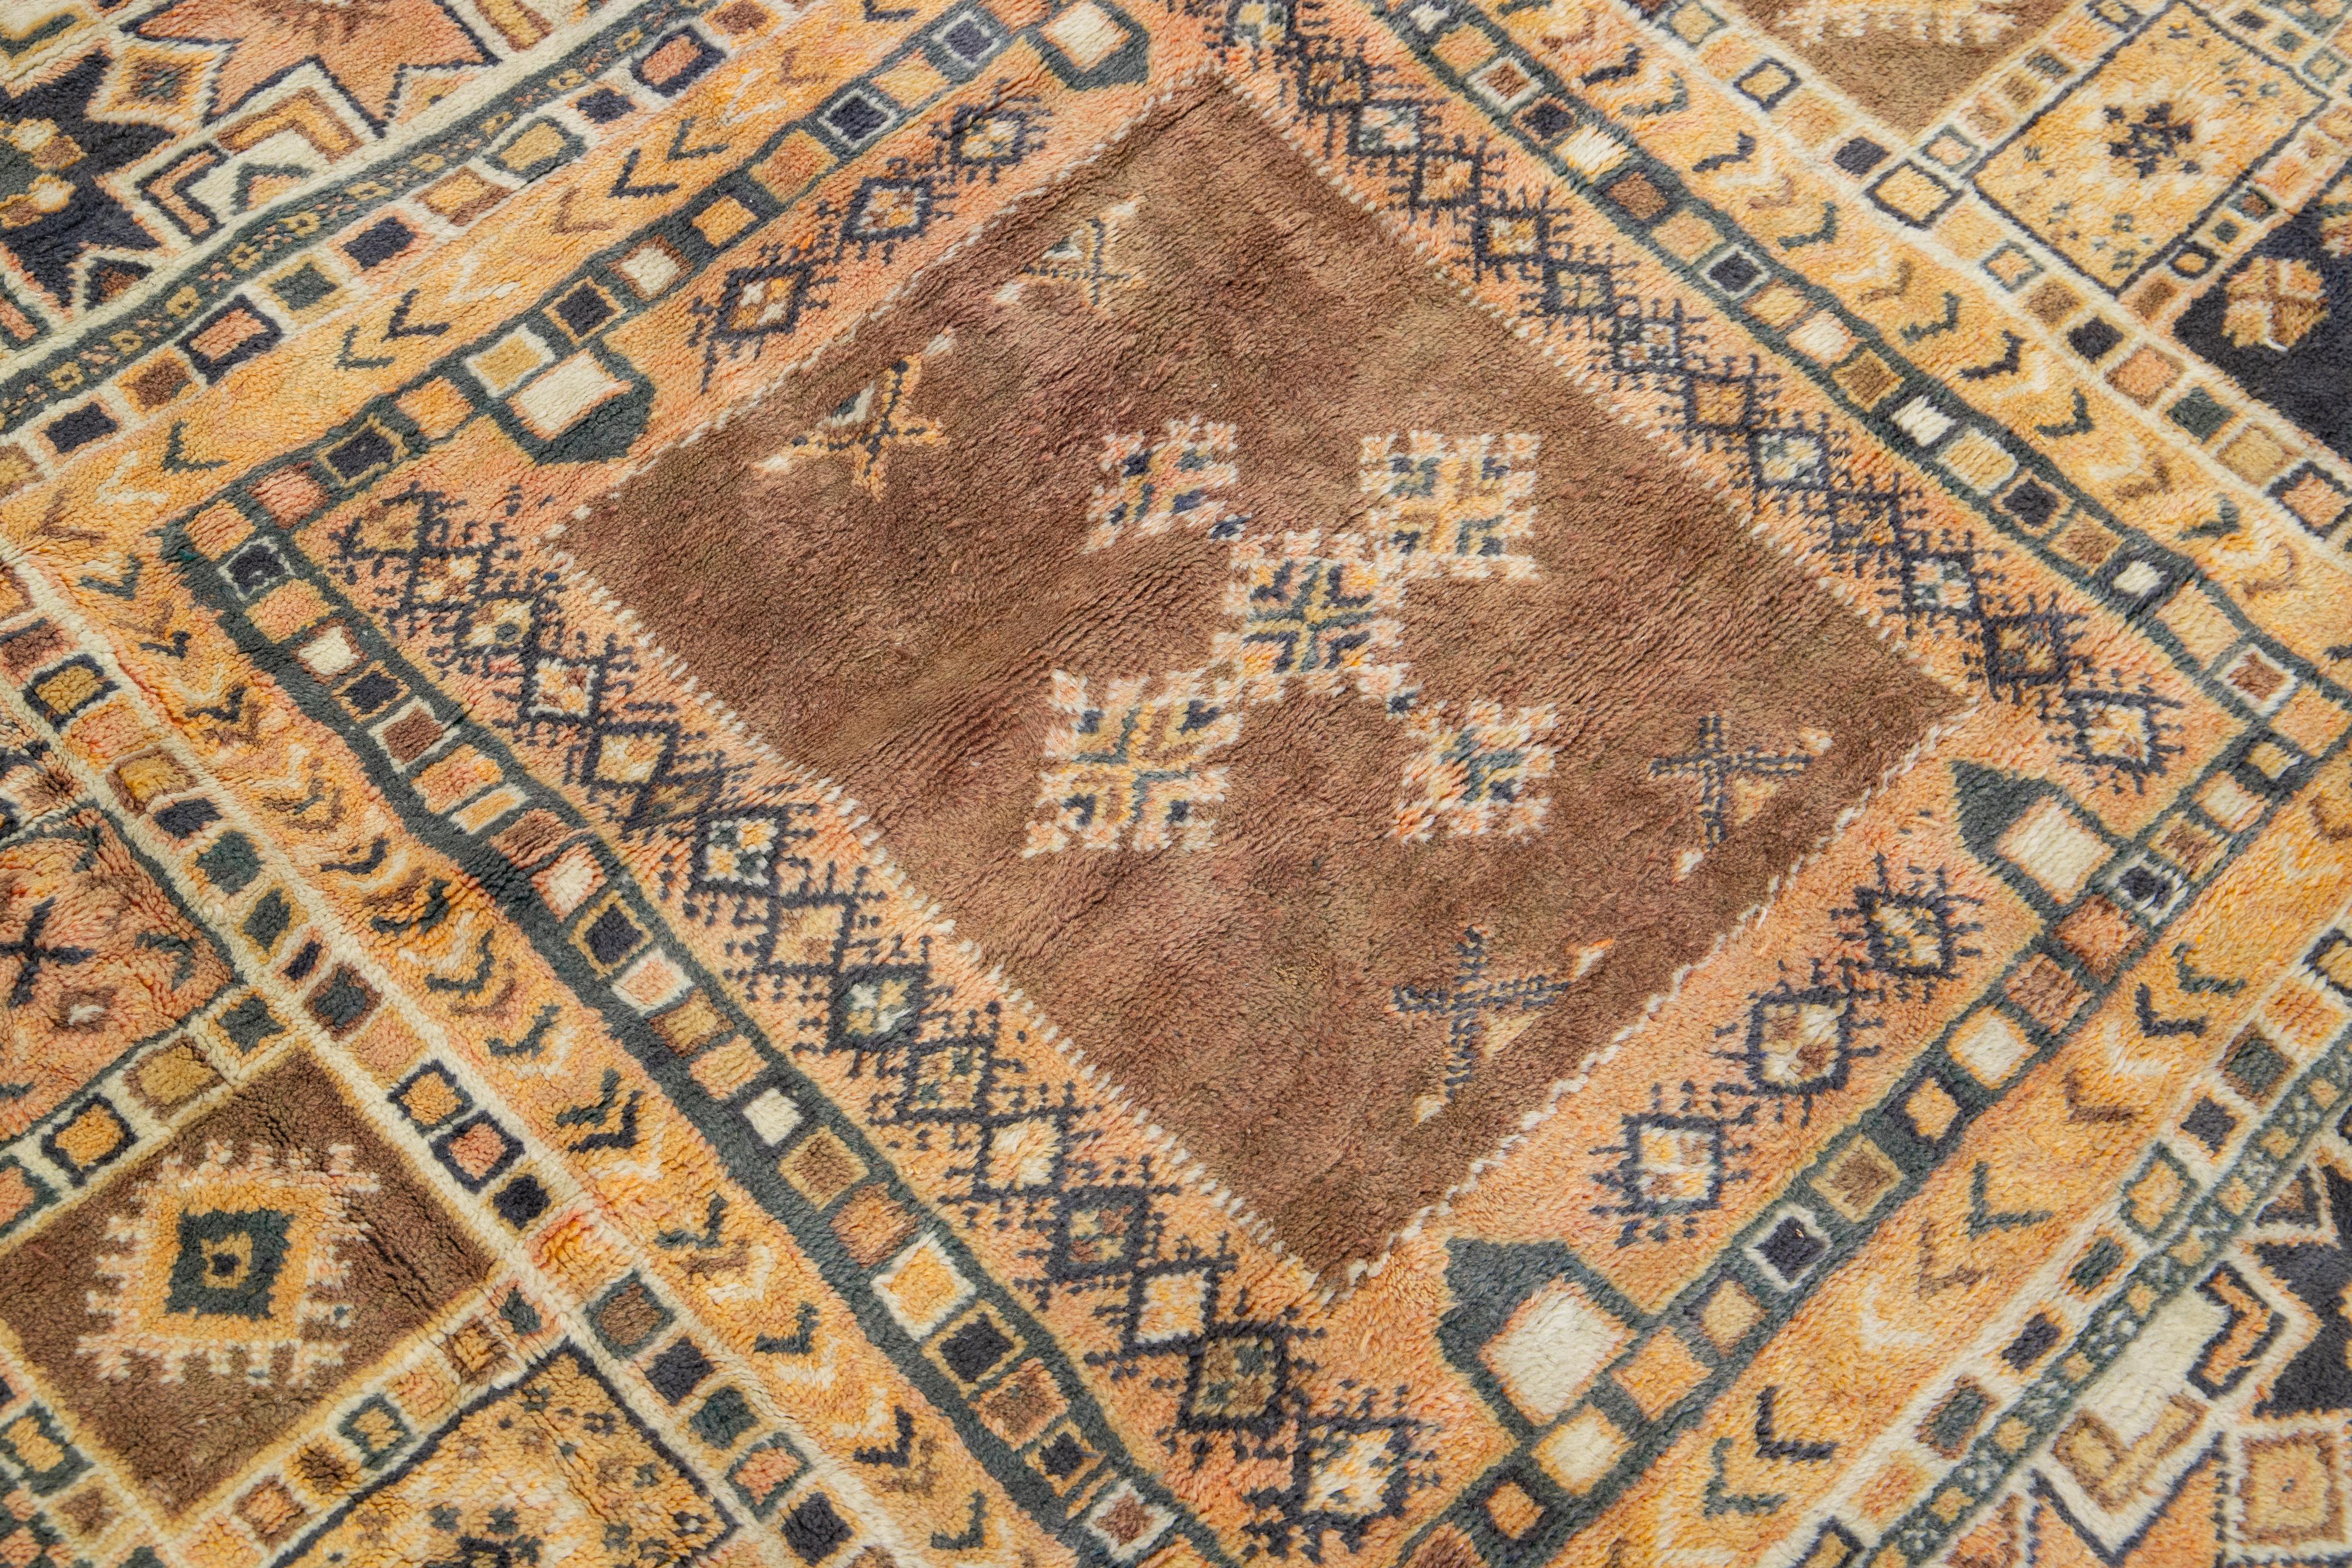 Vintage Oversize Moroccan Wool Rug with Allover Design in Peach & Gray In Excellent Condition For Sale In Norwalk, CT